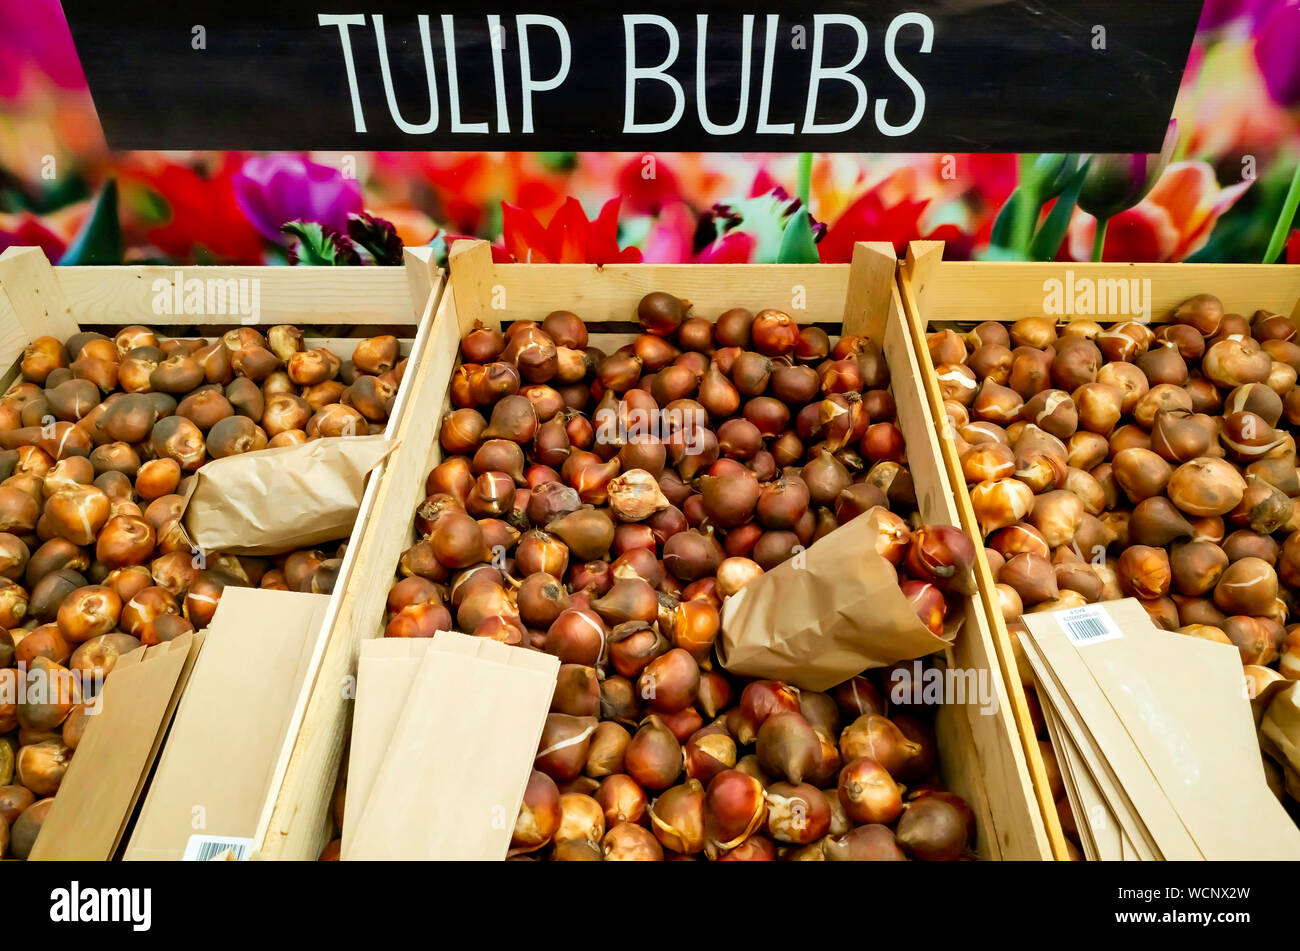 Garden Centre display of Tulip Bulbs for Autumn planting to give flowers next spring Stock Photo